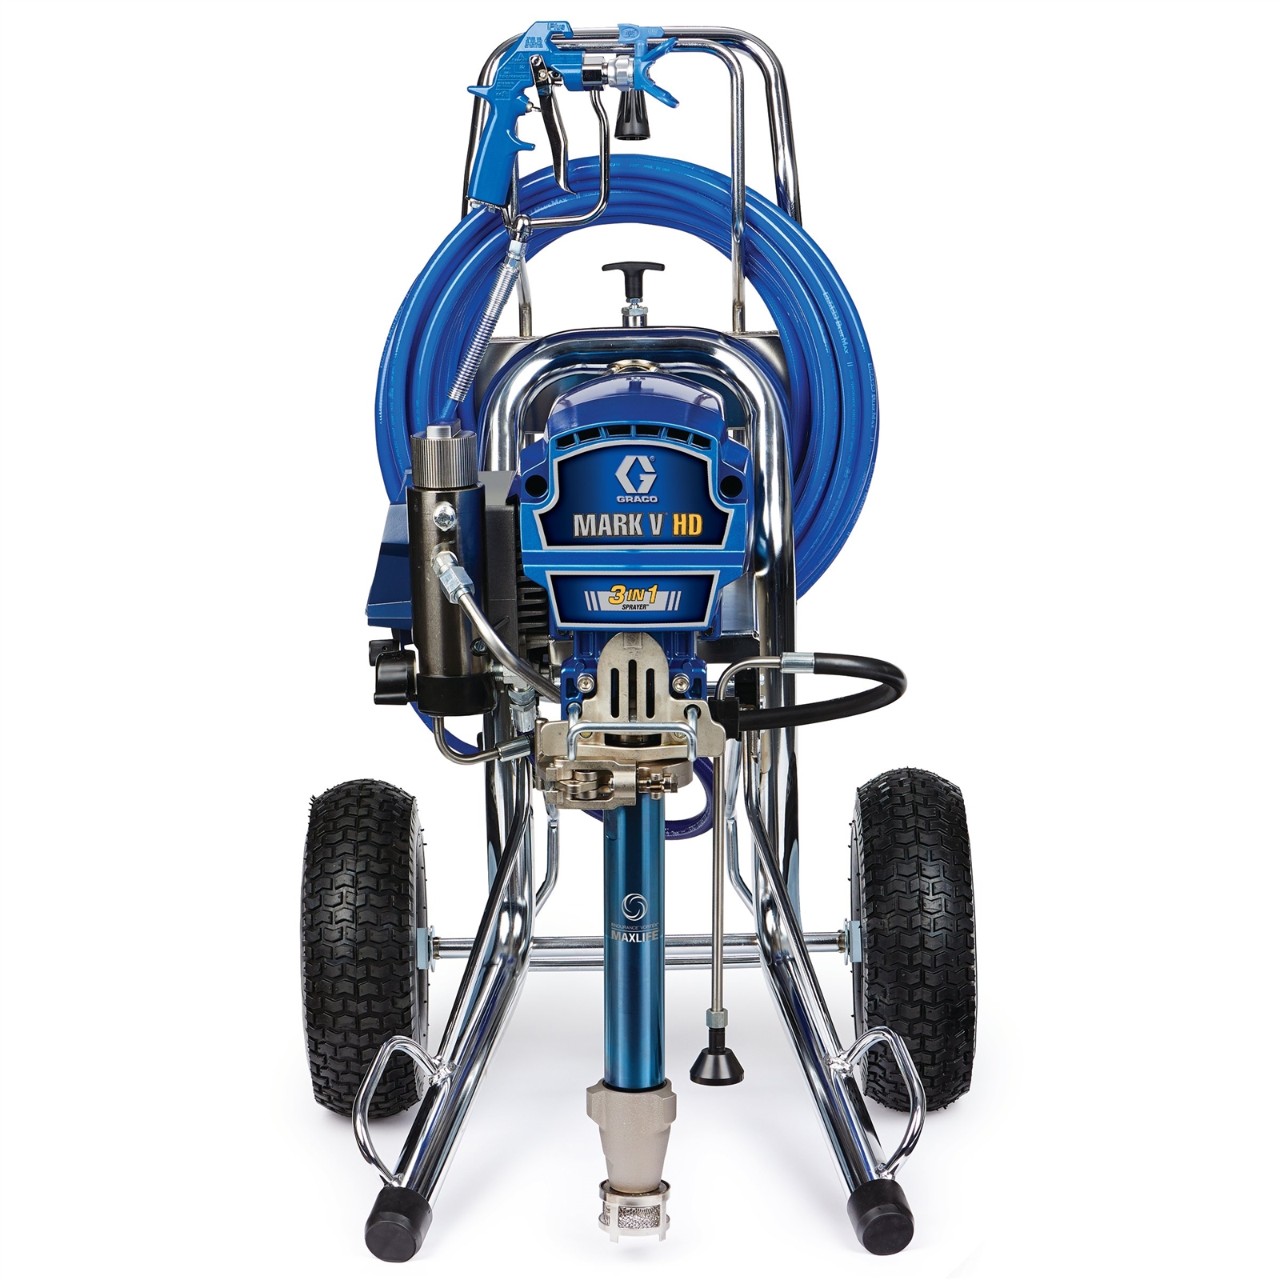 Mark V HD 3-in-1 ProContractor Series Electric Airless Sprayer